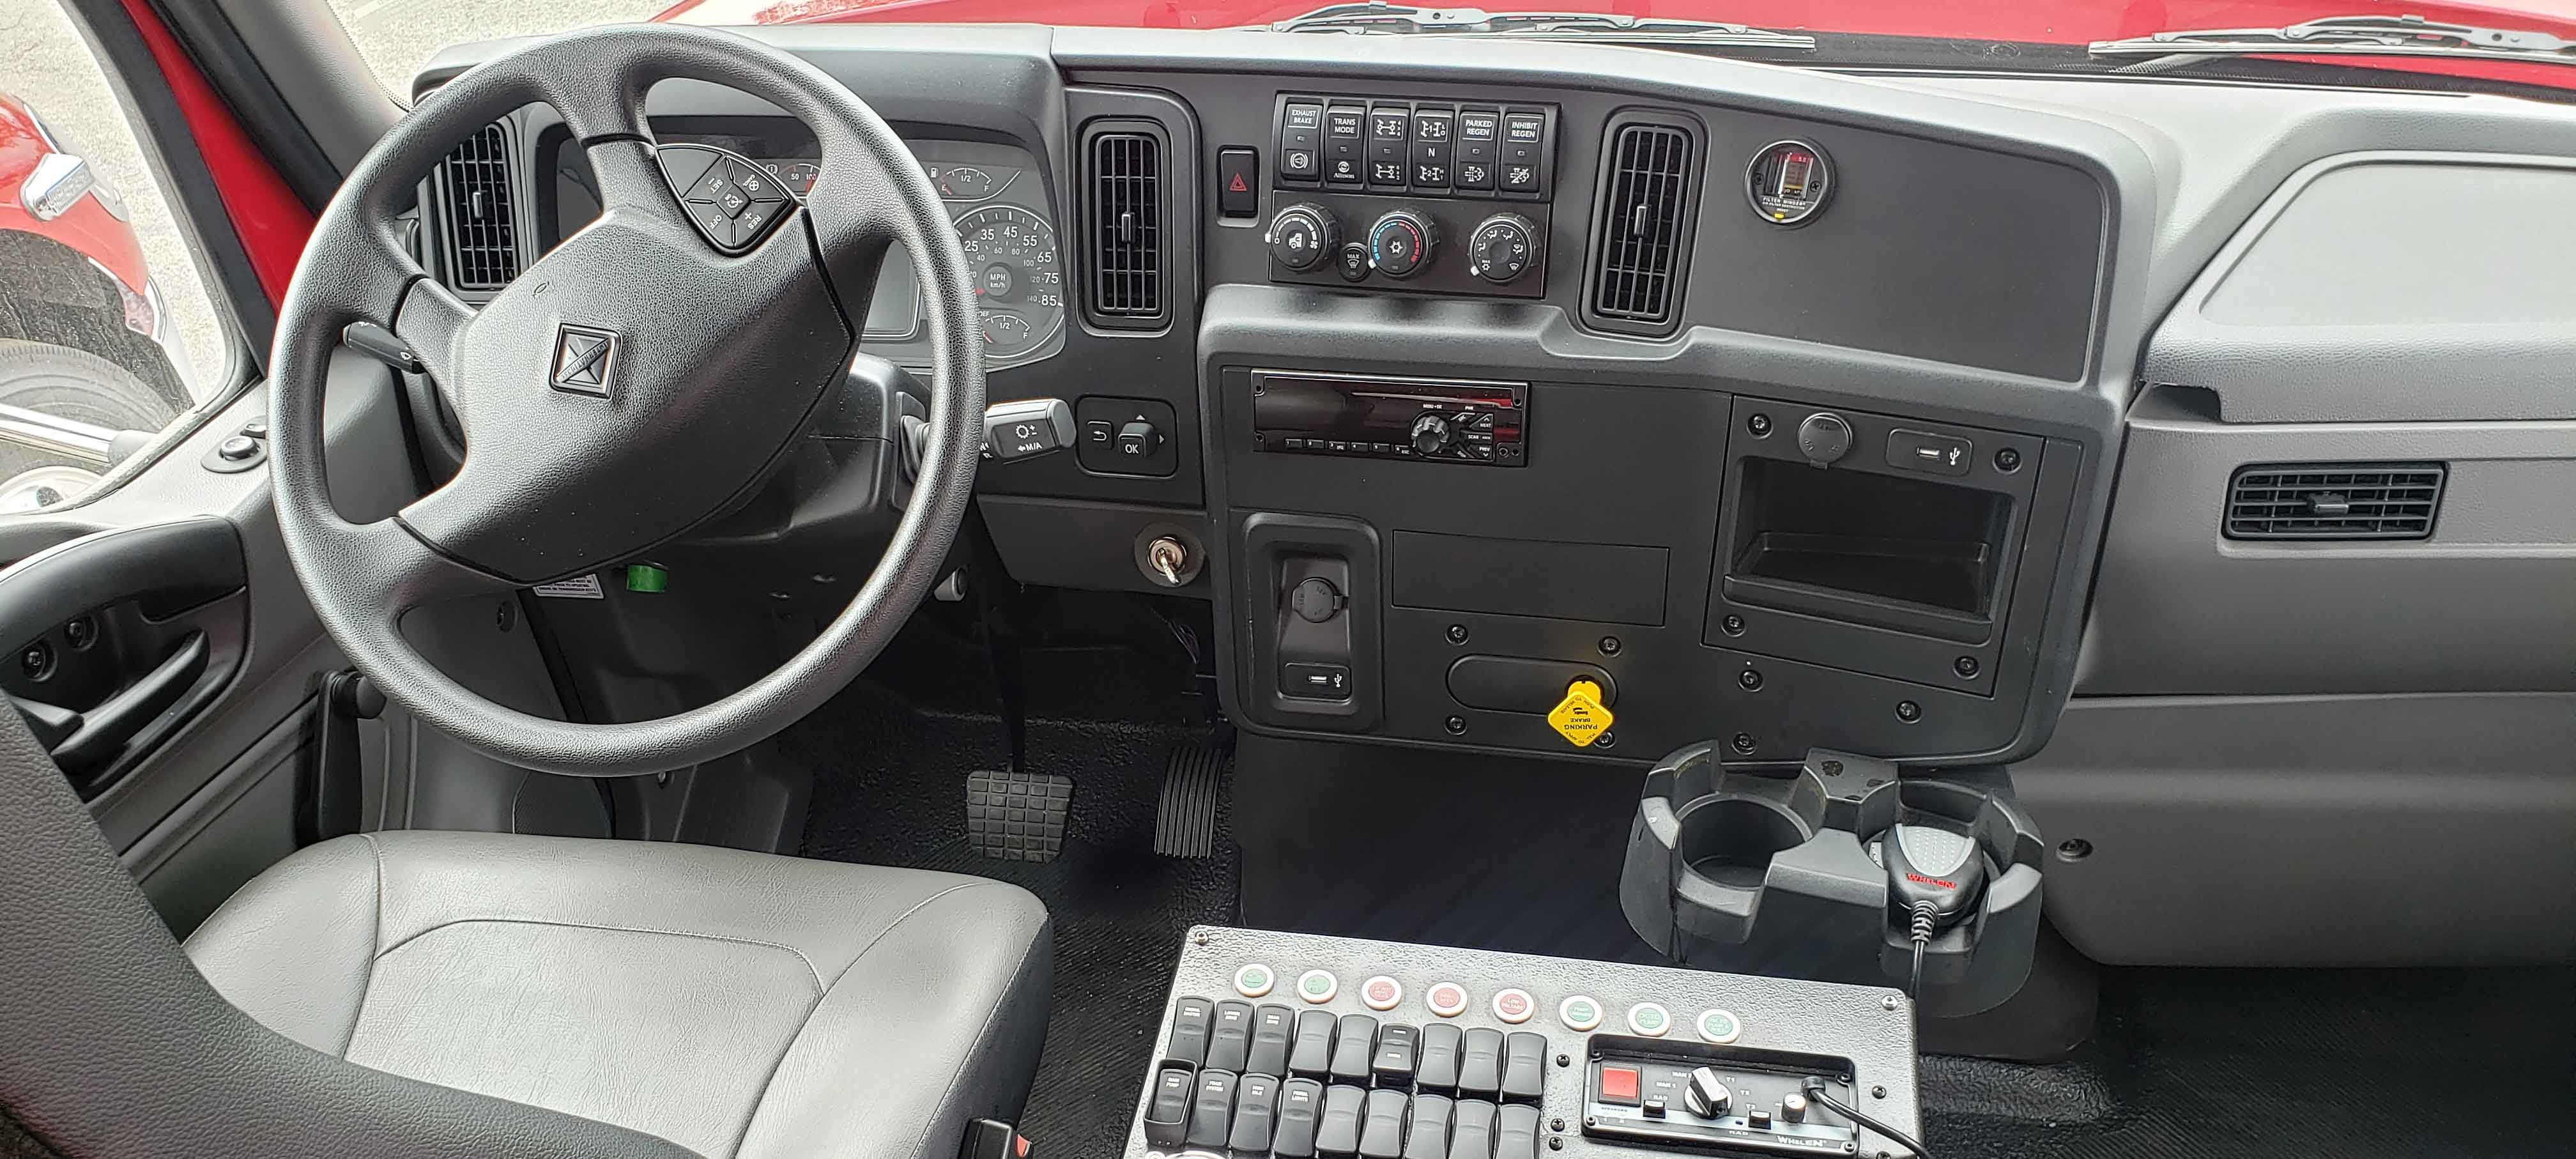 Pierce International Commercial Fire Truck Chassis Cab Interior